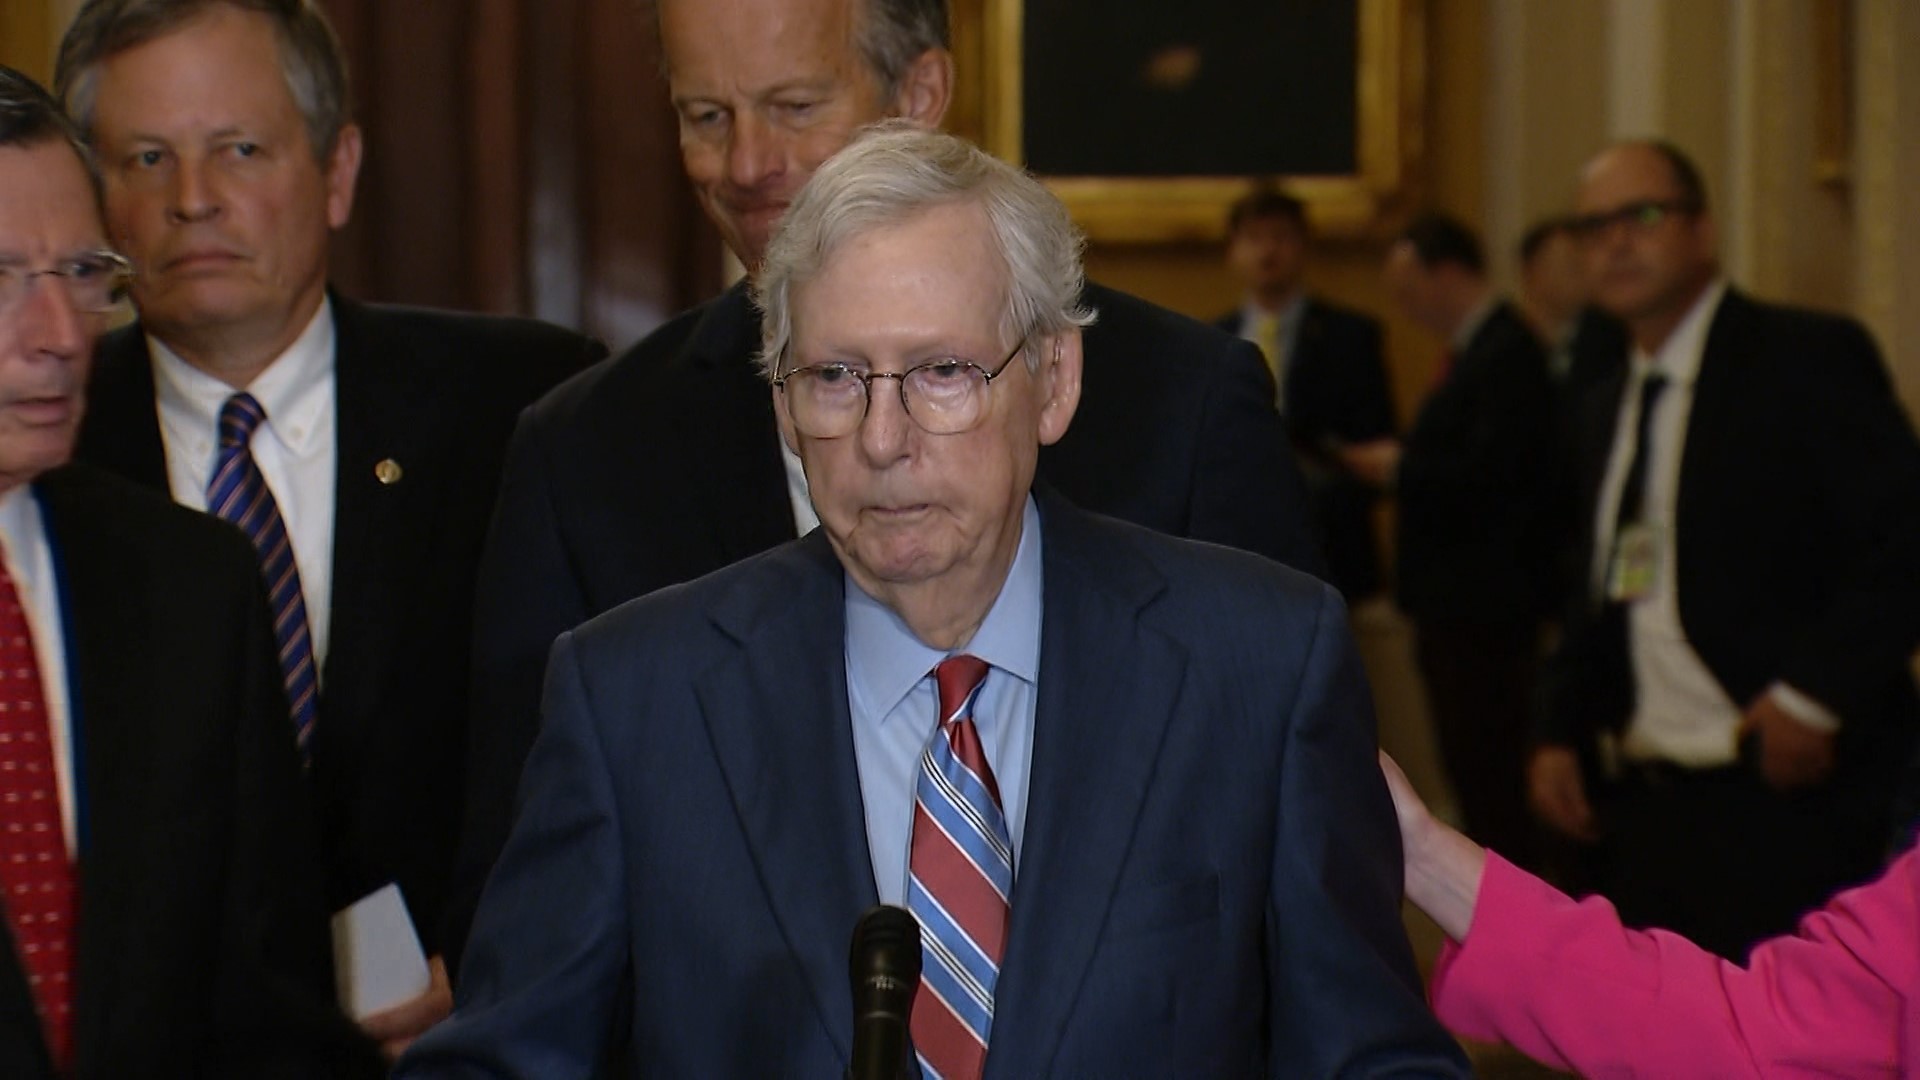 Senator Mitch McConnell was speaking before stopping and staying silent for several seconds as people asked if he was OK.